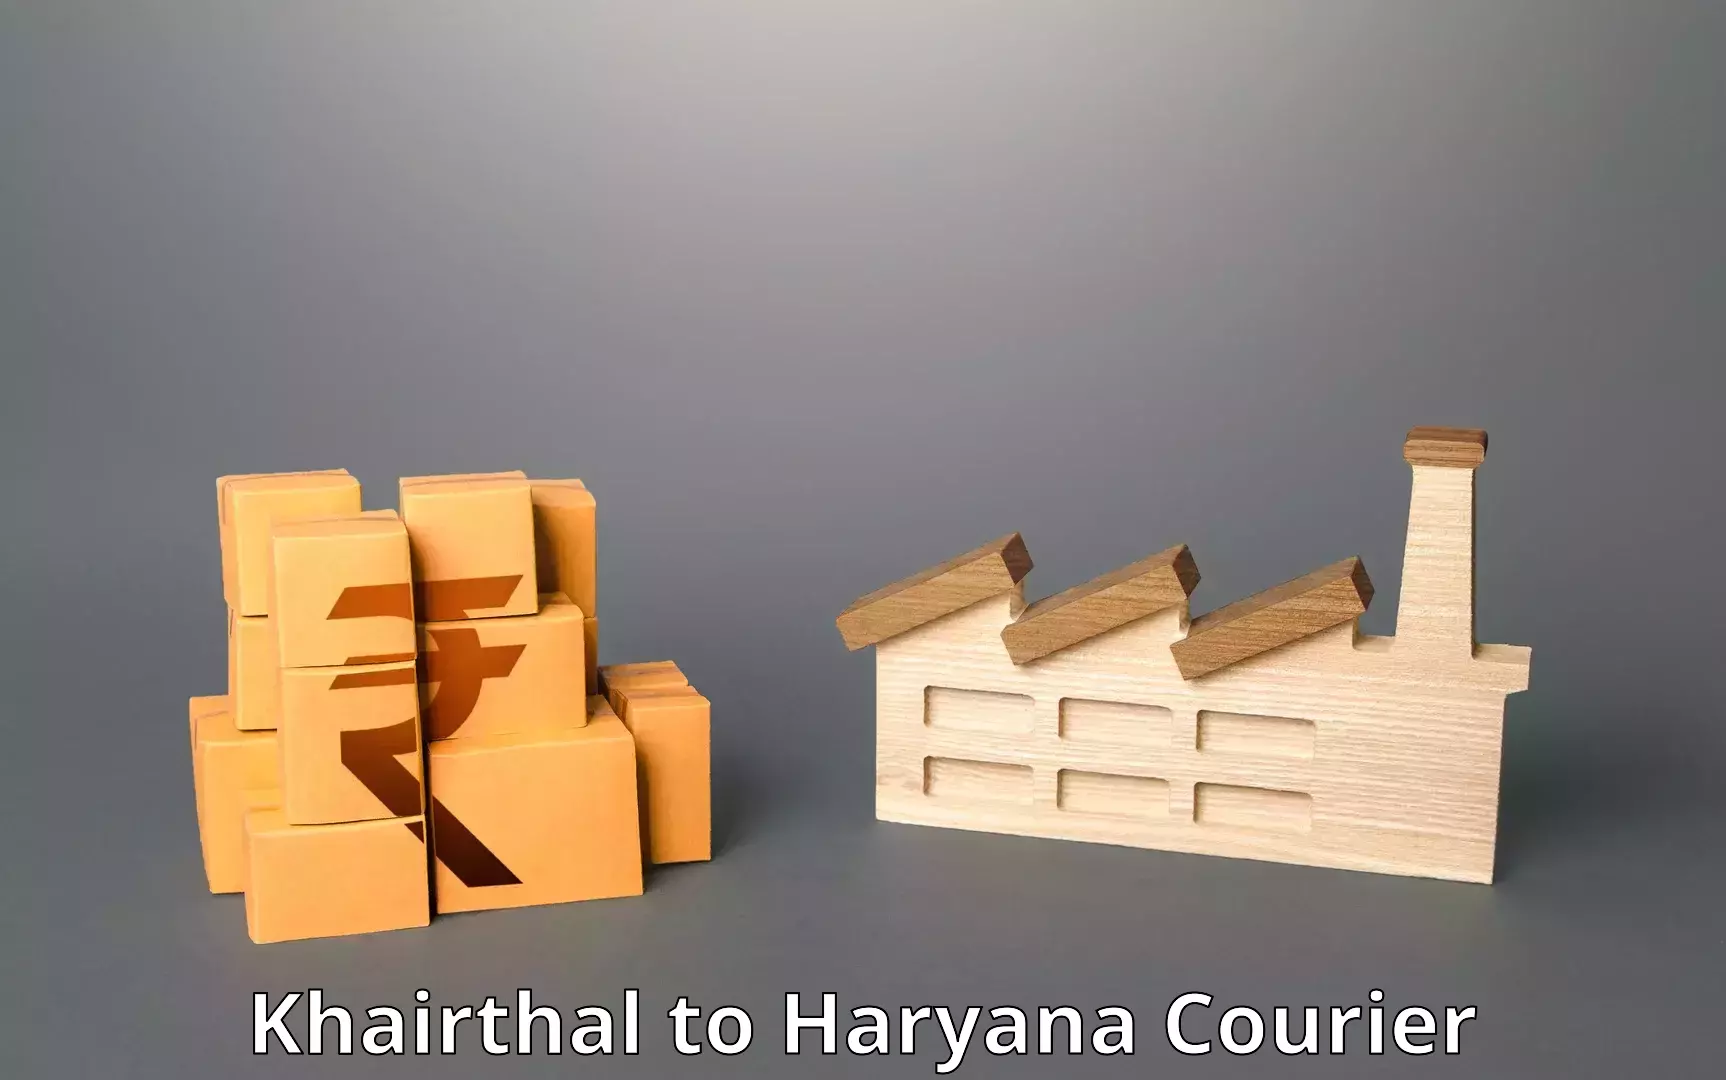 International courier networks Khairthal to Gurgaon